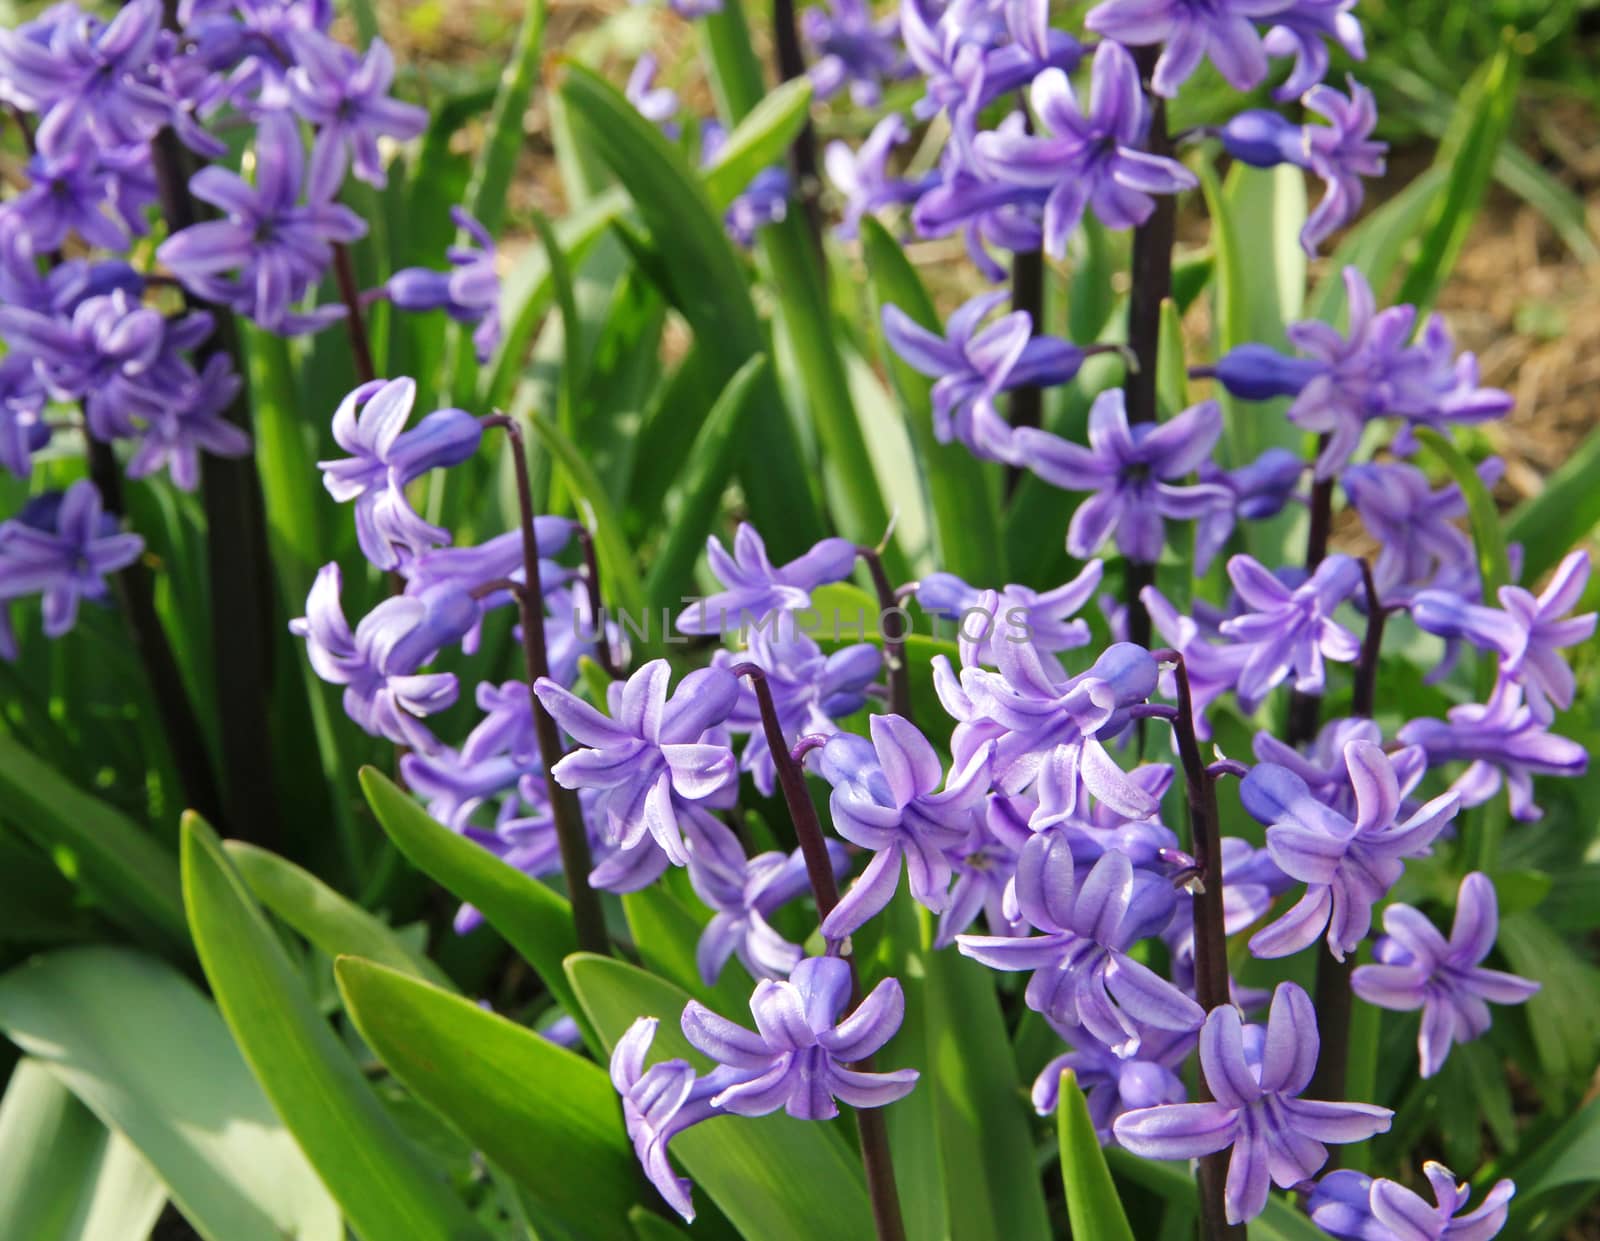 Purple hyacinths (hyacinthus) is one of the first beautiful spri by oxanatravel